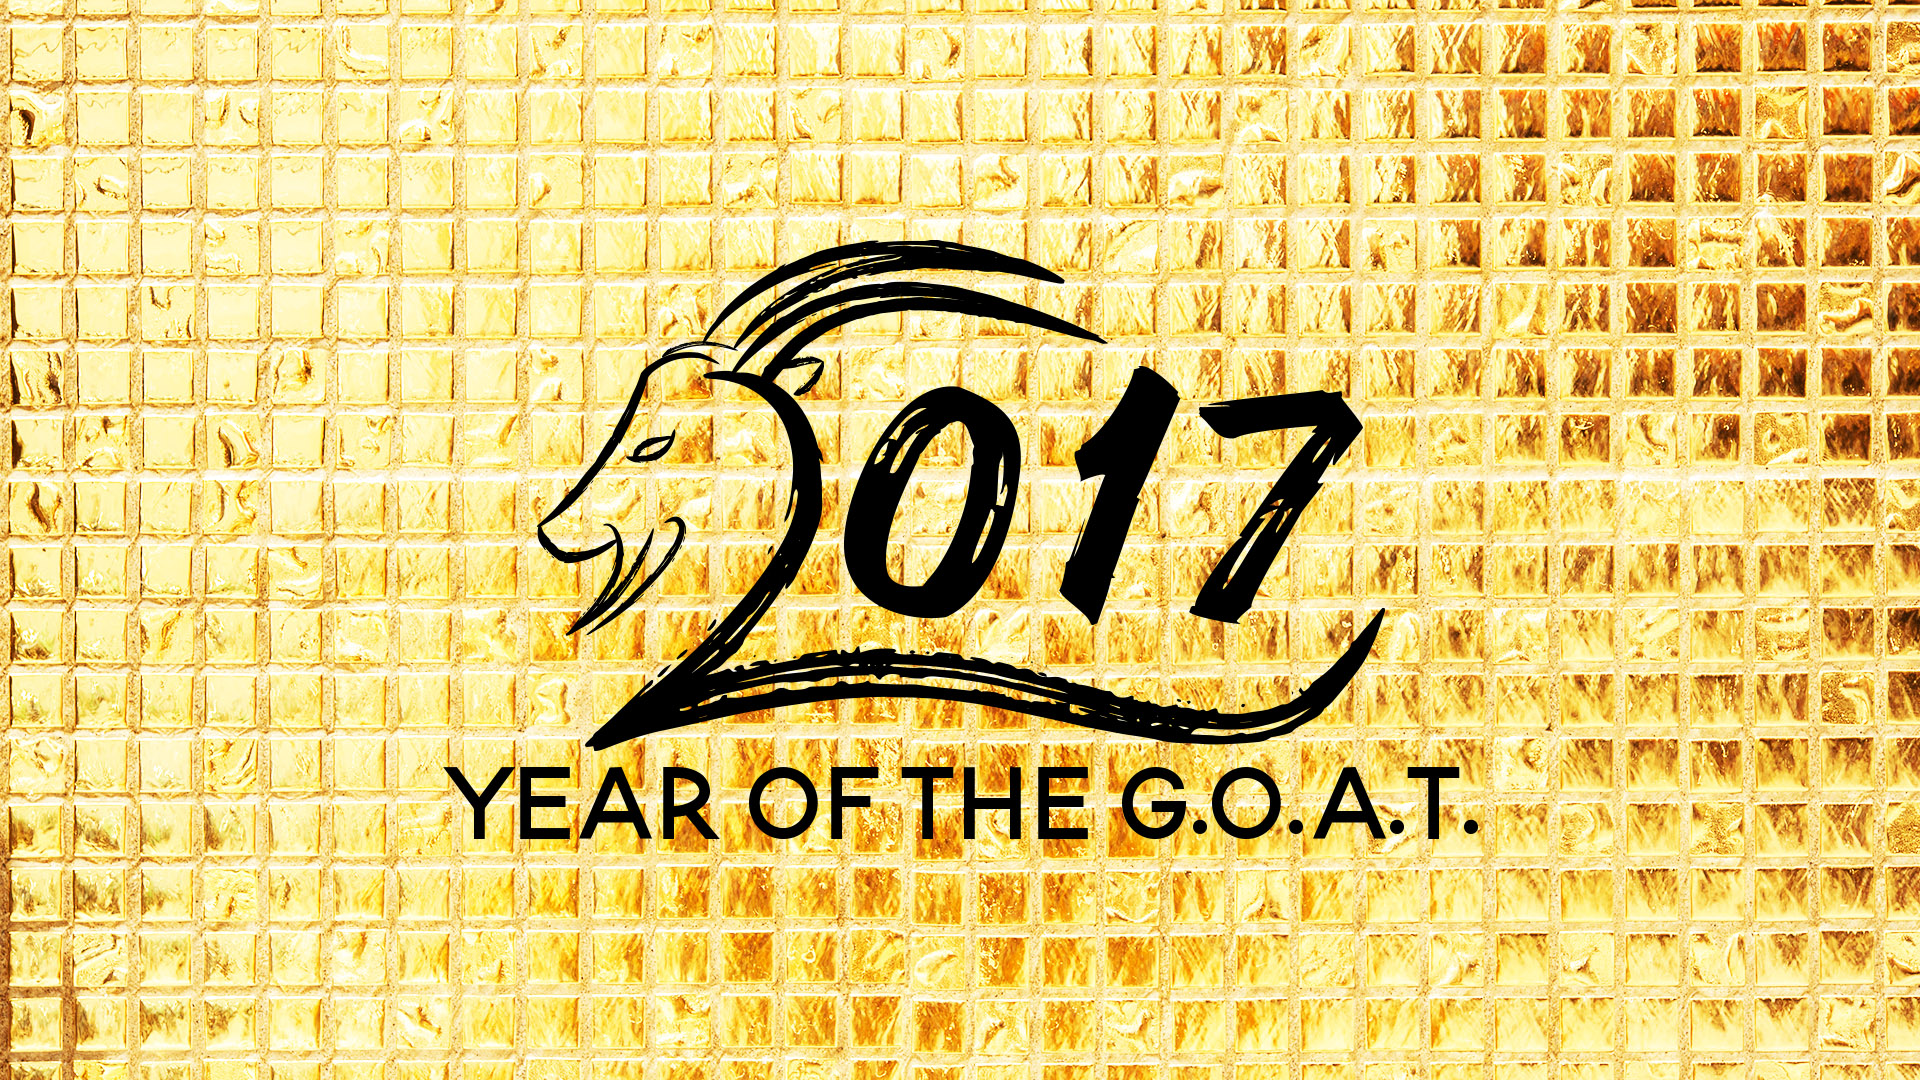 The Year of the G.O.A.T. 